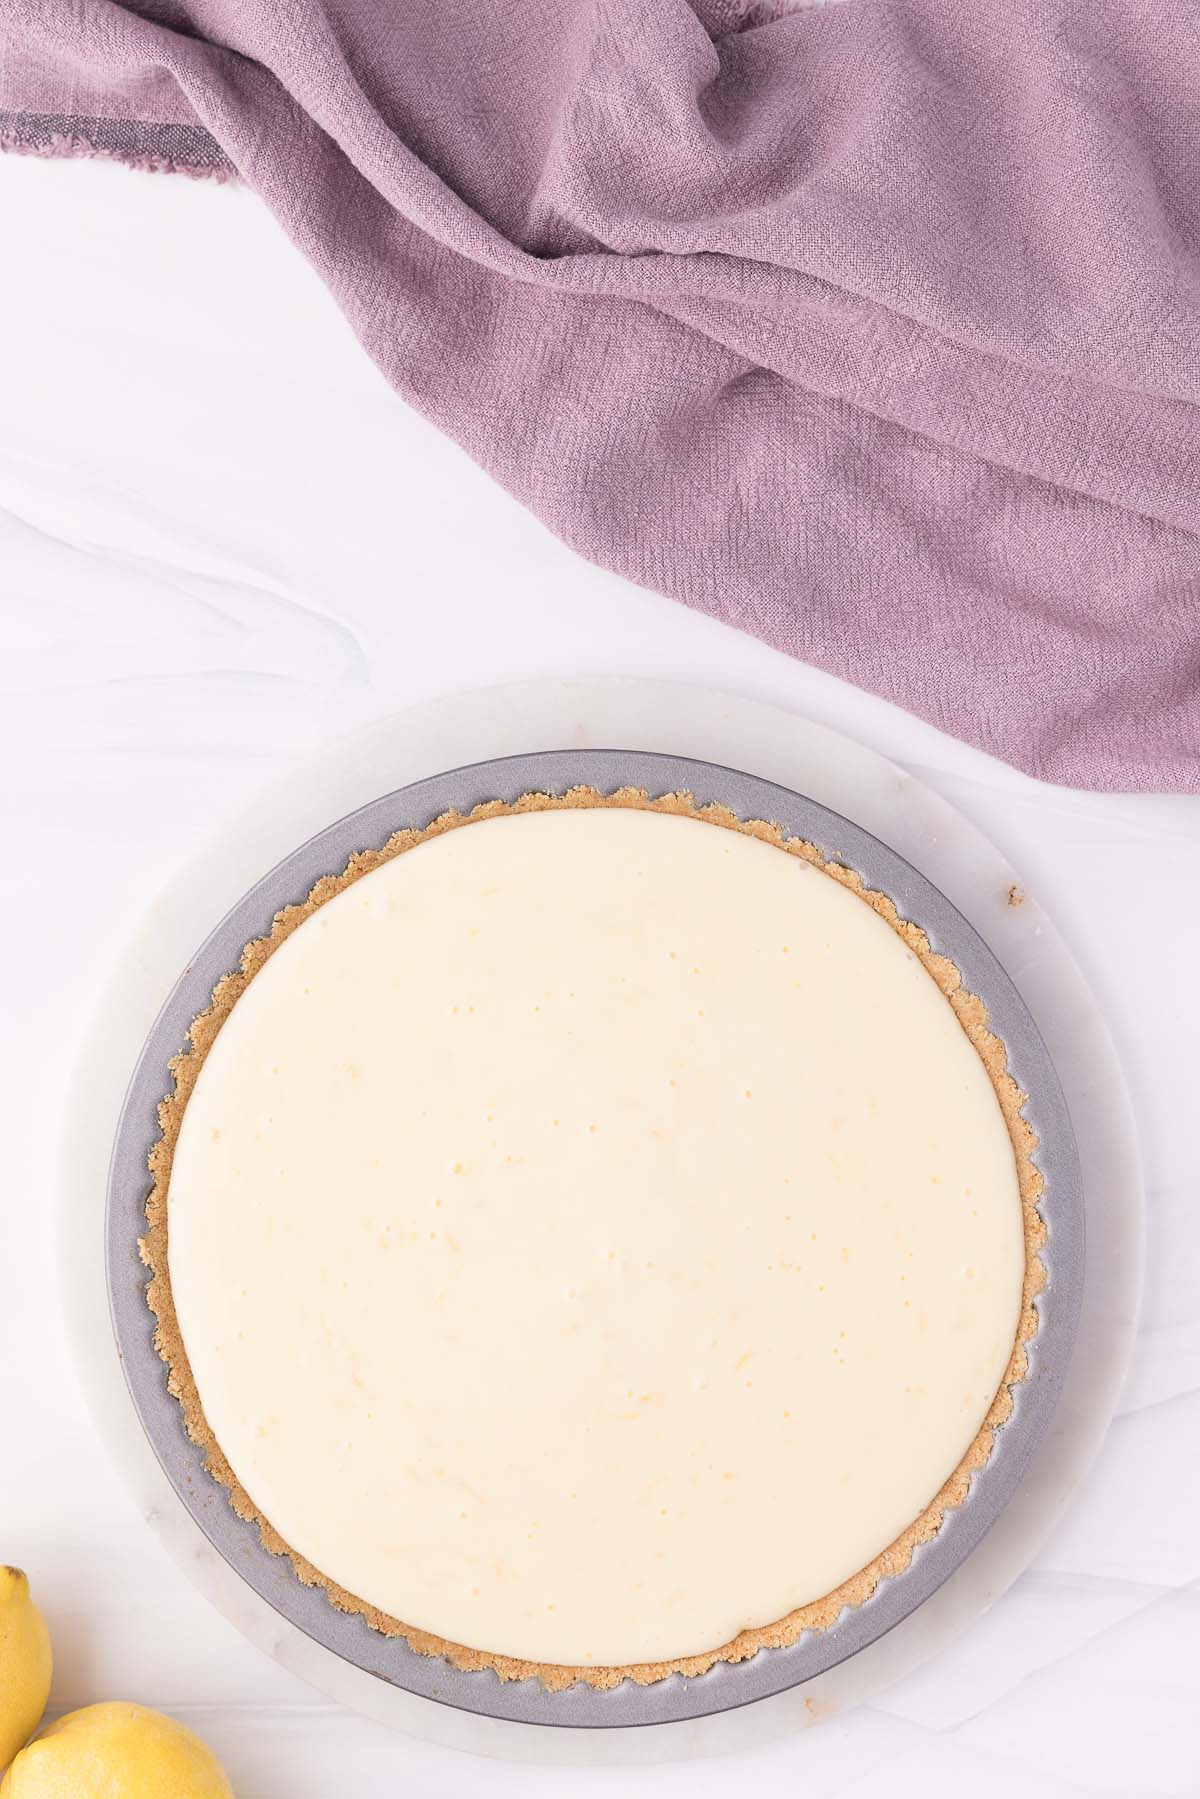 A freshly made lemon icebox pie on a gray round dish, accompanied by a purple cloth and lemons on a white surface.